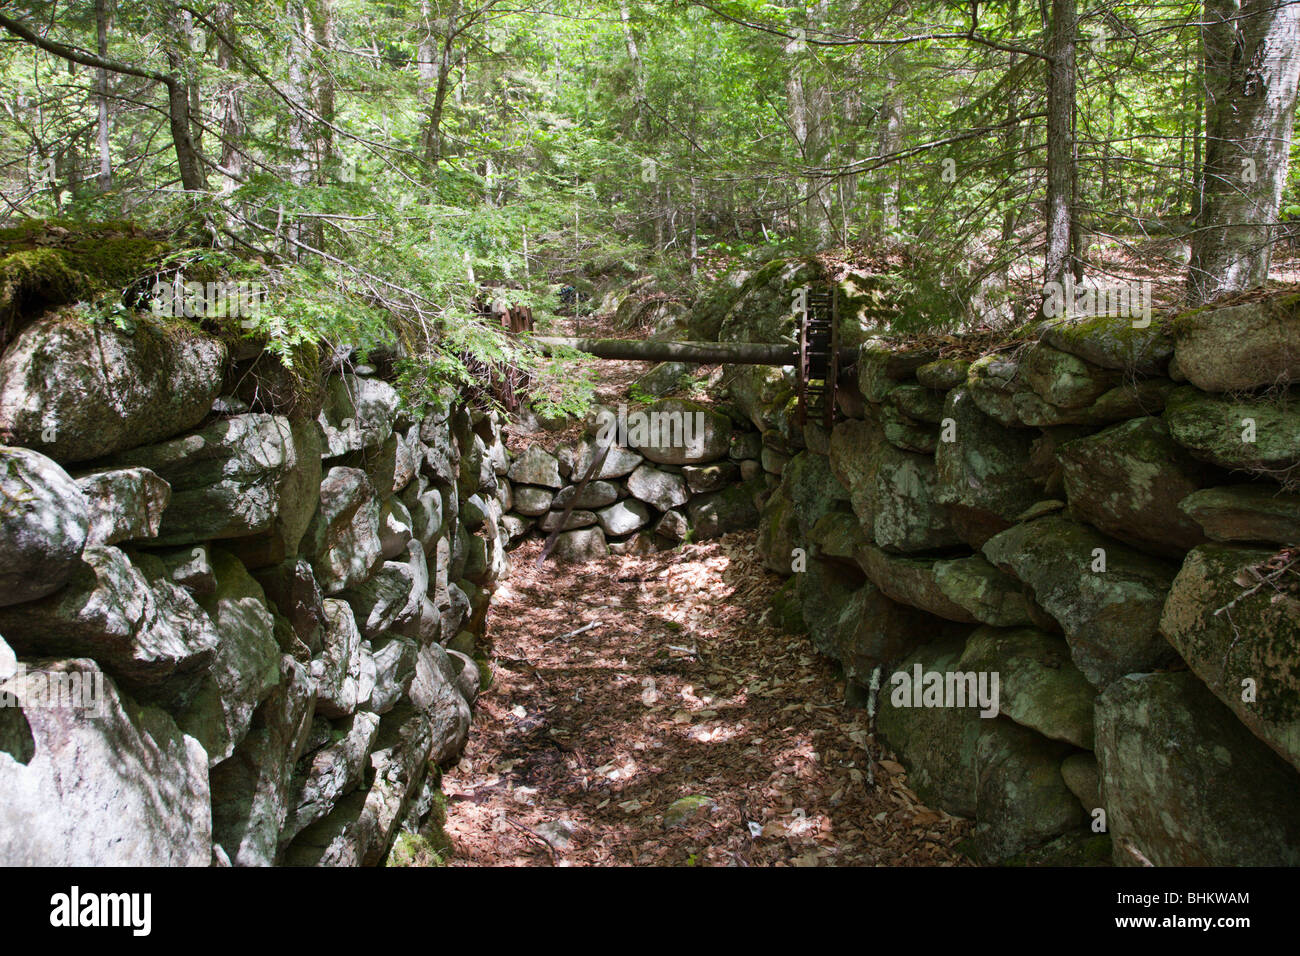 Thornton Gore which was a old hill farm community abandoned in the 19th century. Located in Thornton, New Hampshire Stock Photo